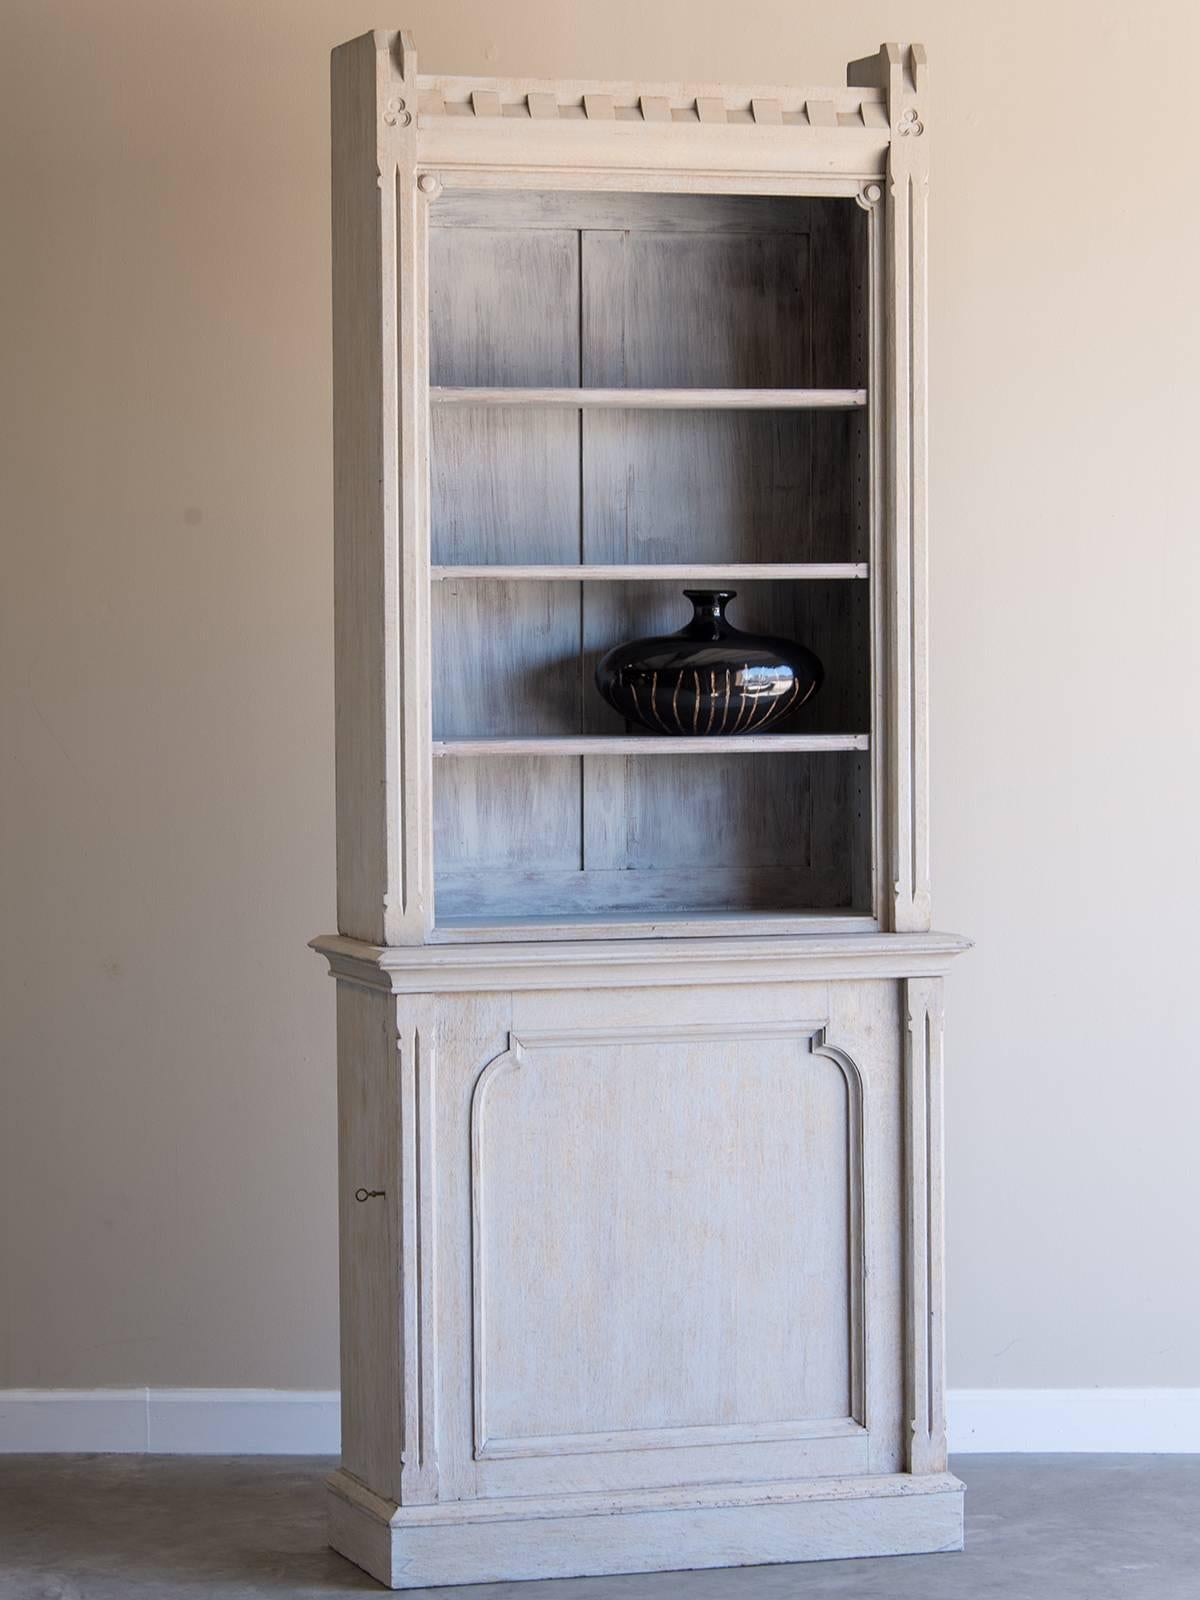 Receive our new selections direct from 1stdibs by email each week. Please click Follow Dealer below and see them first!

Shallow antique English painted oak display cabinet bookcase circa 1875. The crenellated pattern on the top open section gives